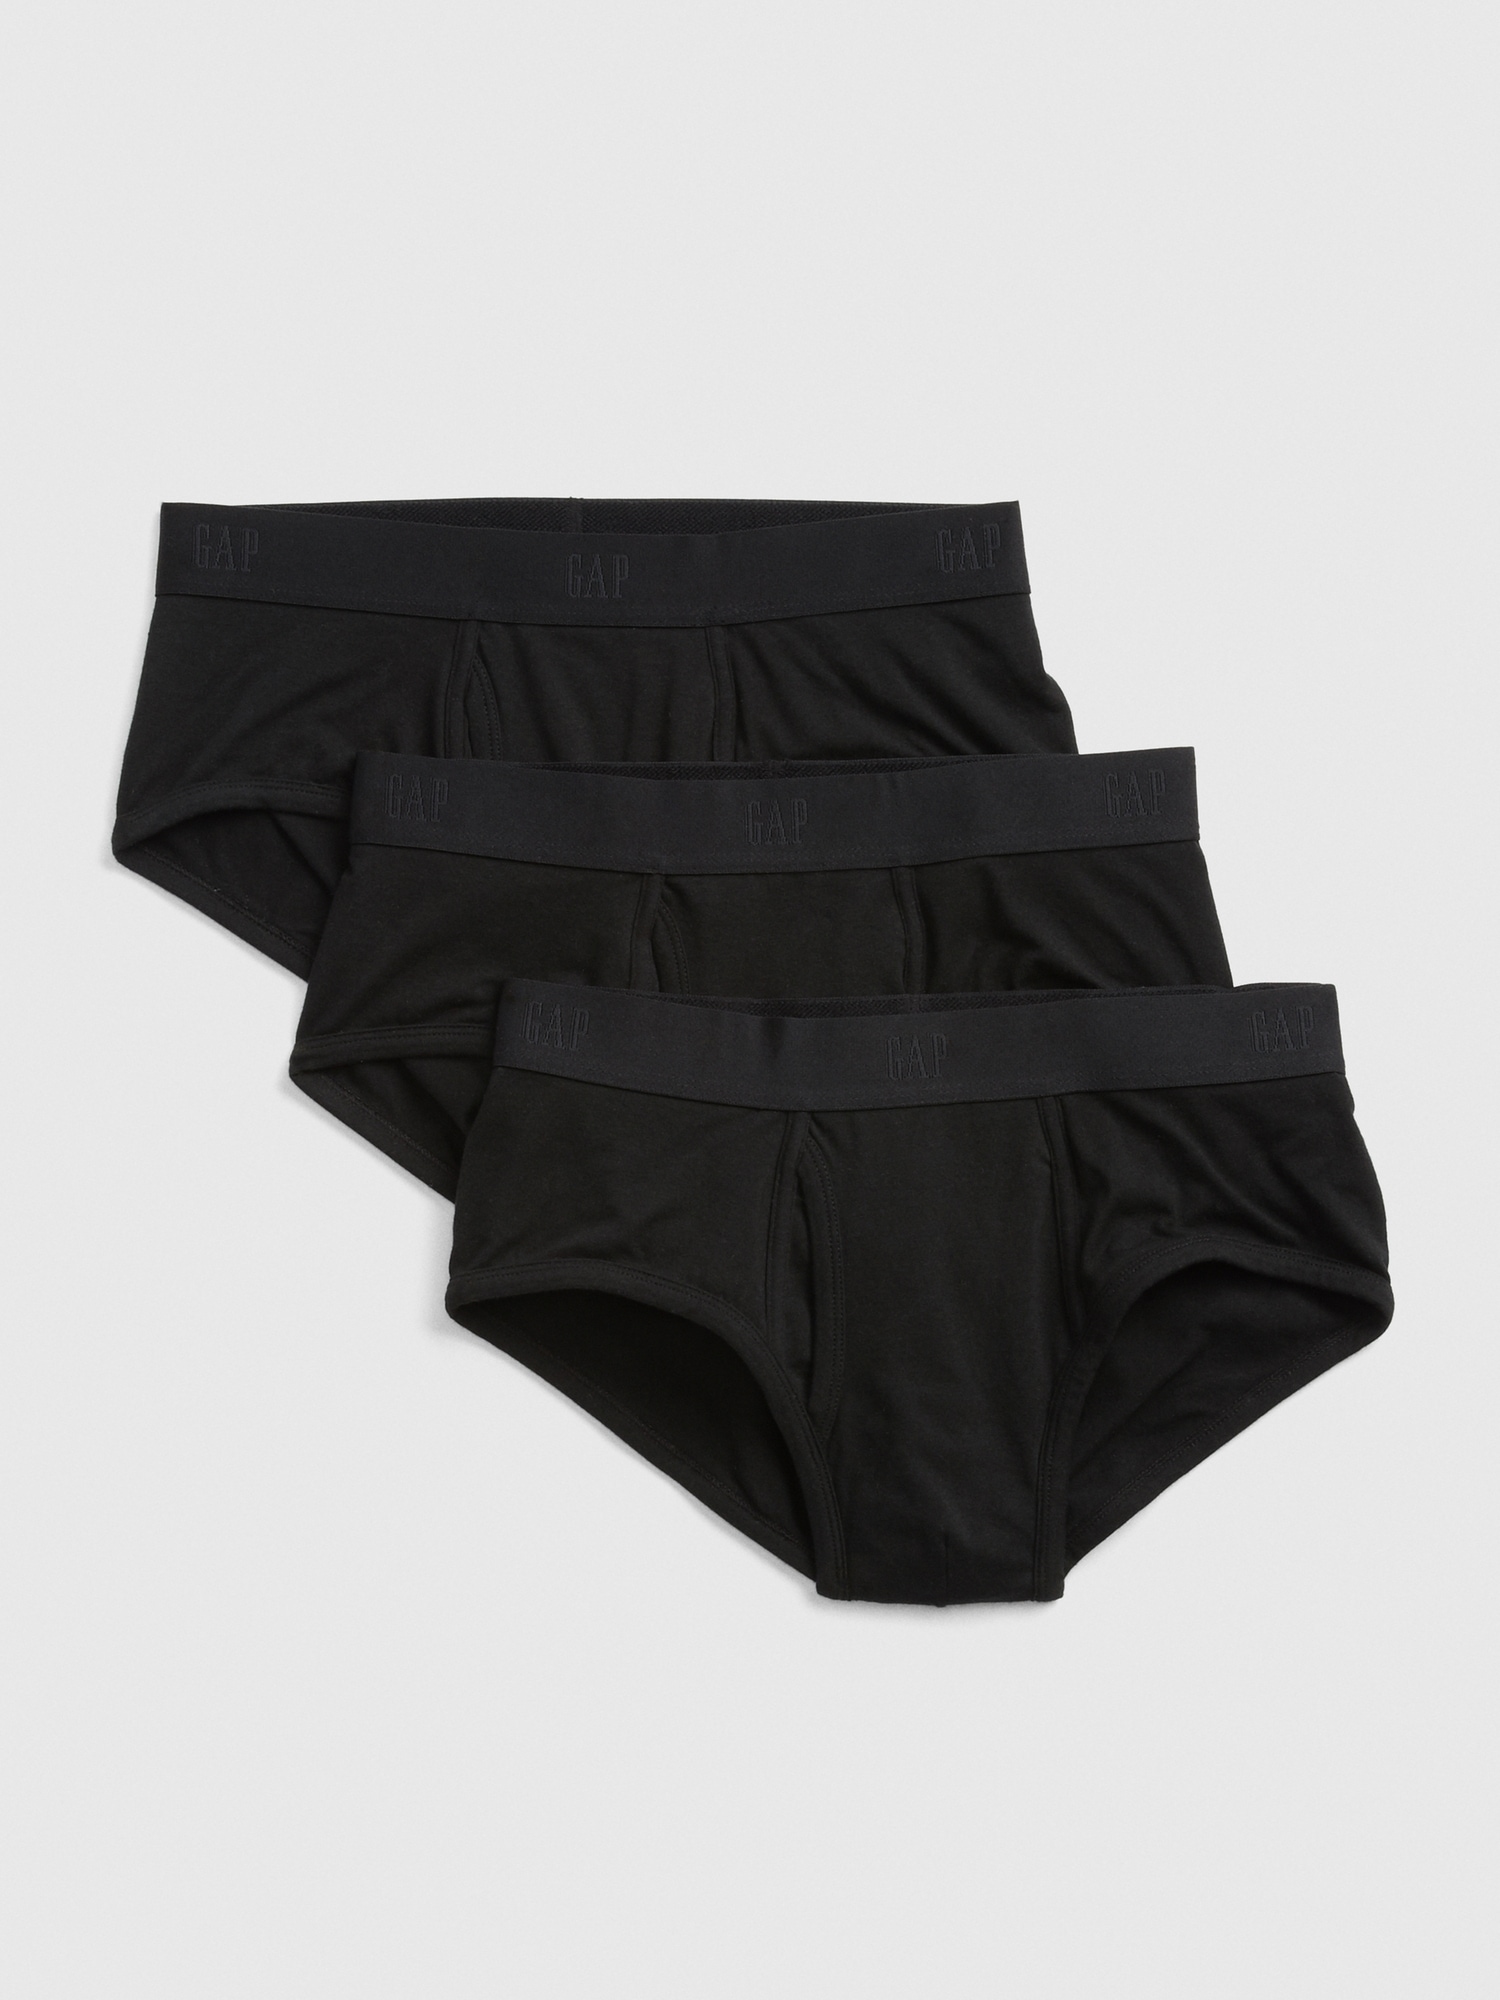 GAP Boys Basic Underwear - Pack of 5 at best price in Ahmedabad by